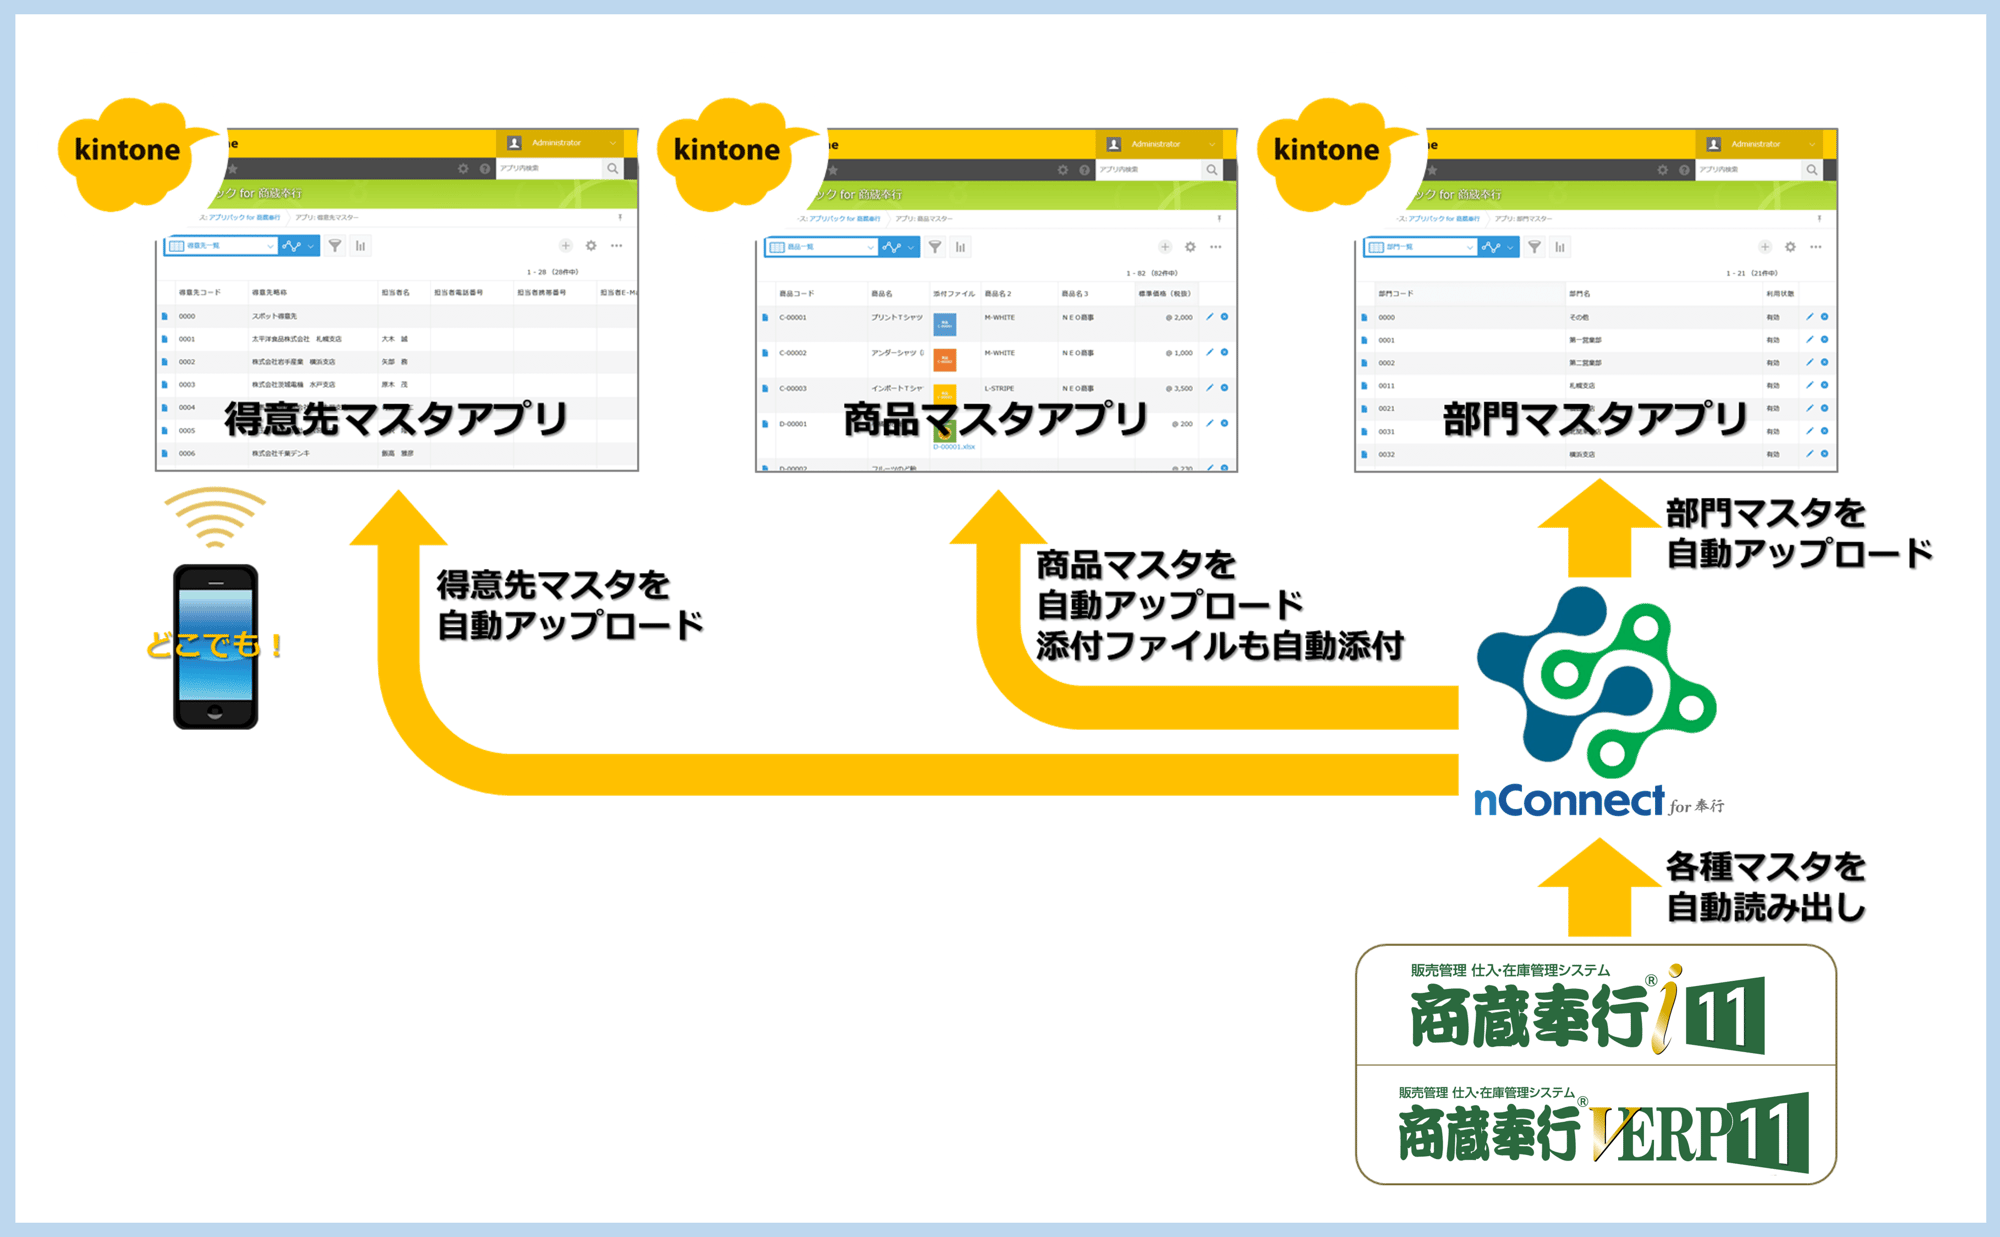 kintoneAppPack02nConnect for 奉行でアップロード作業を自動化